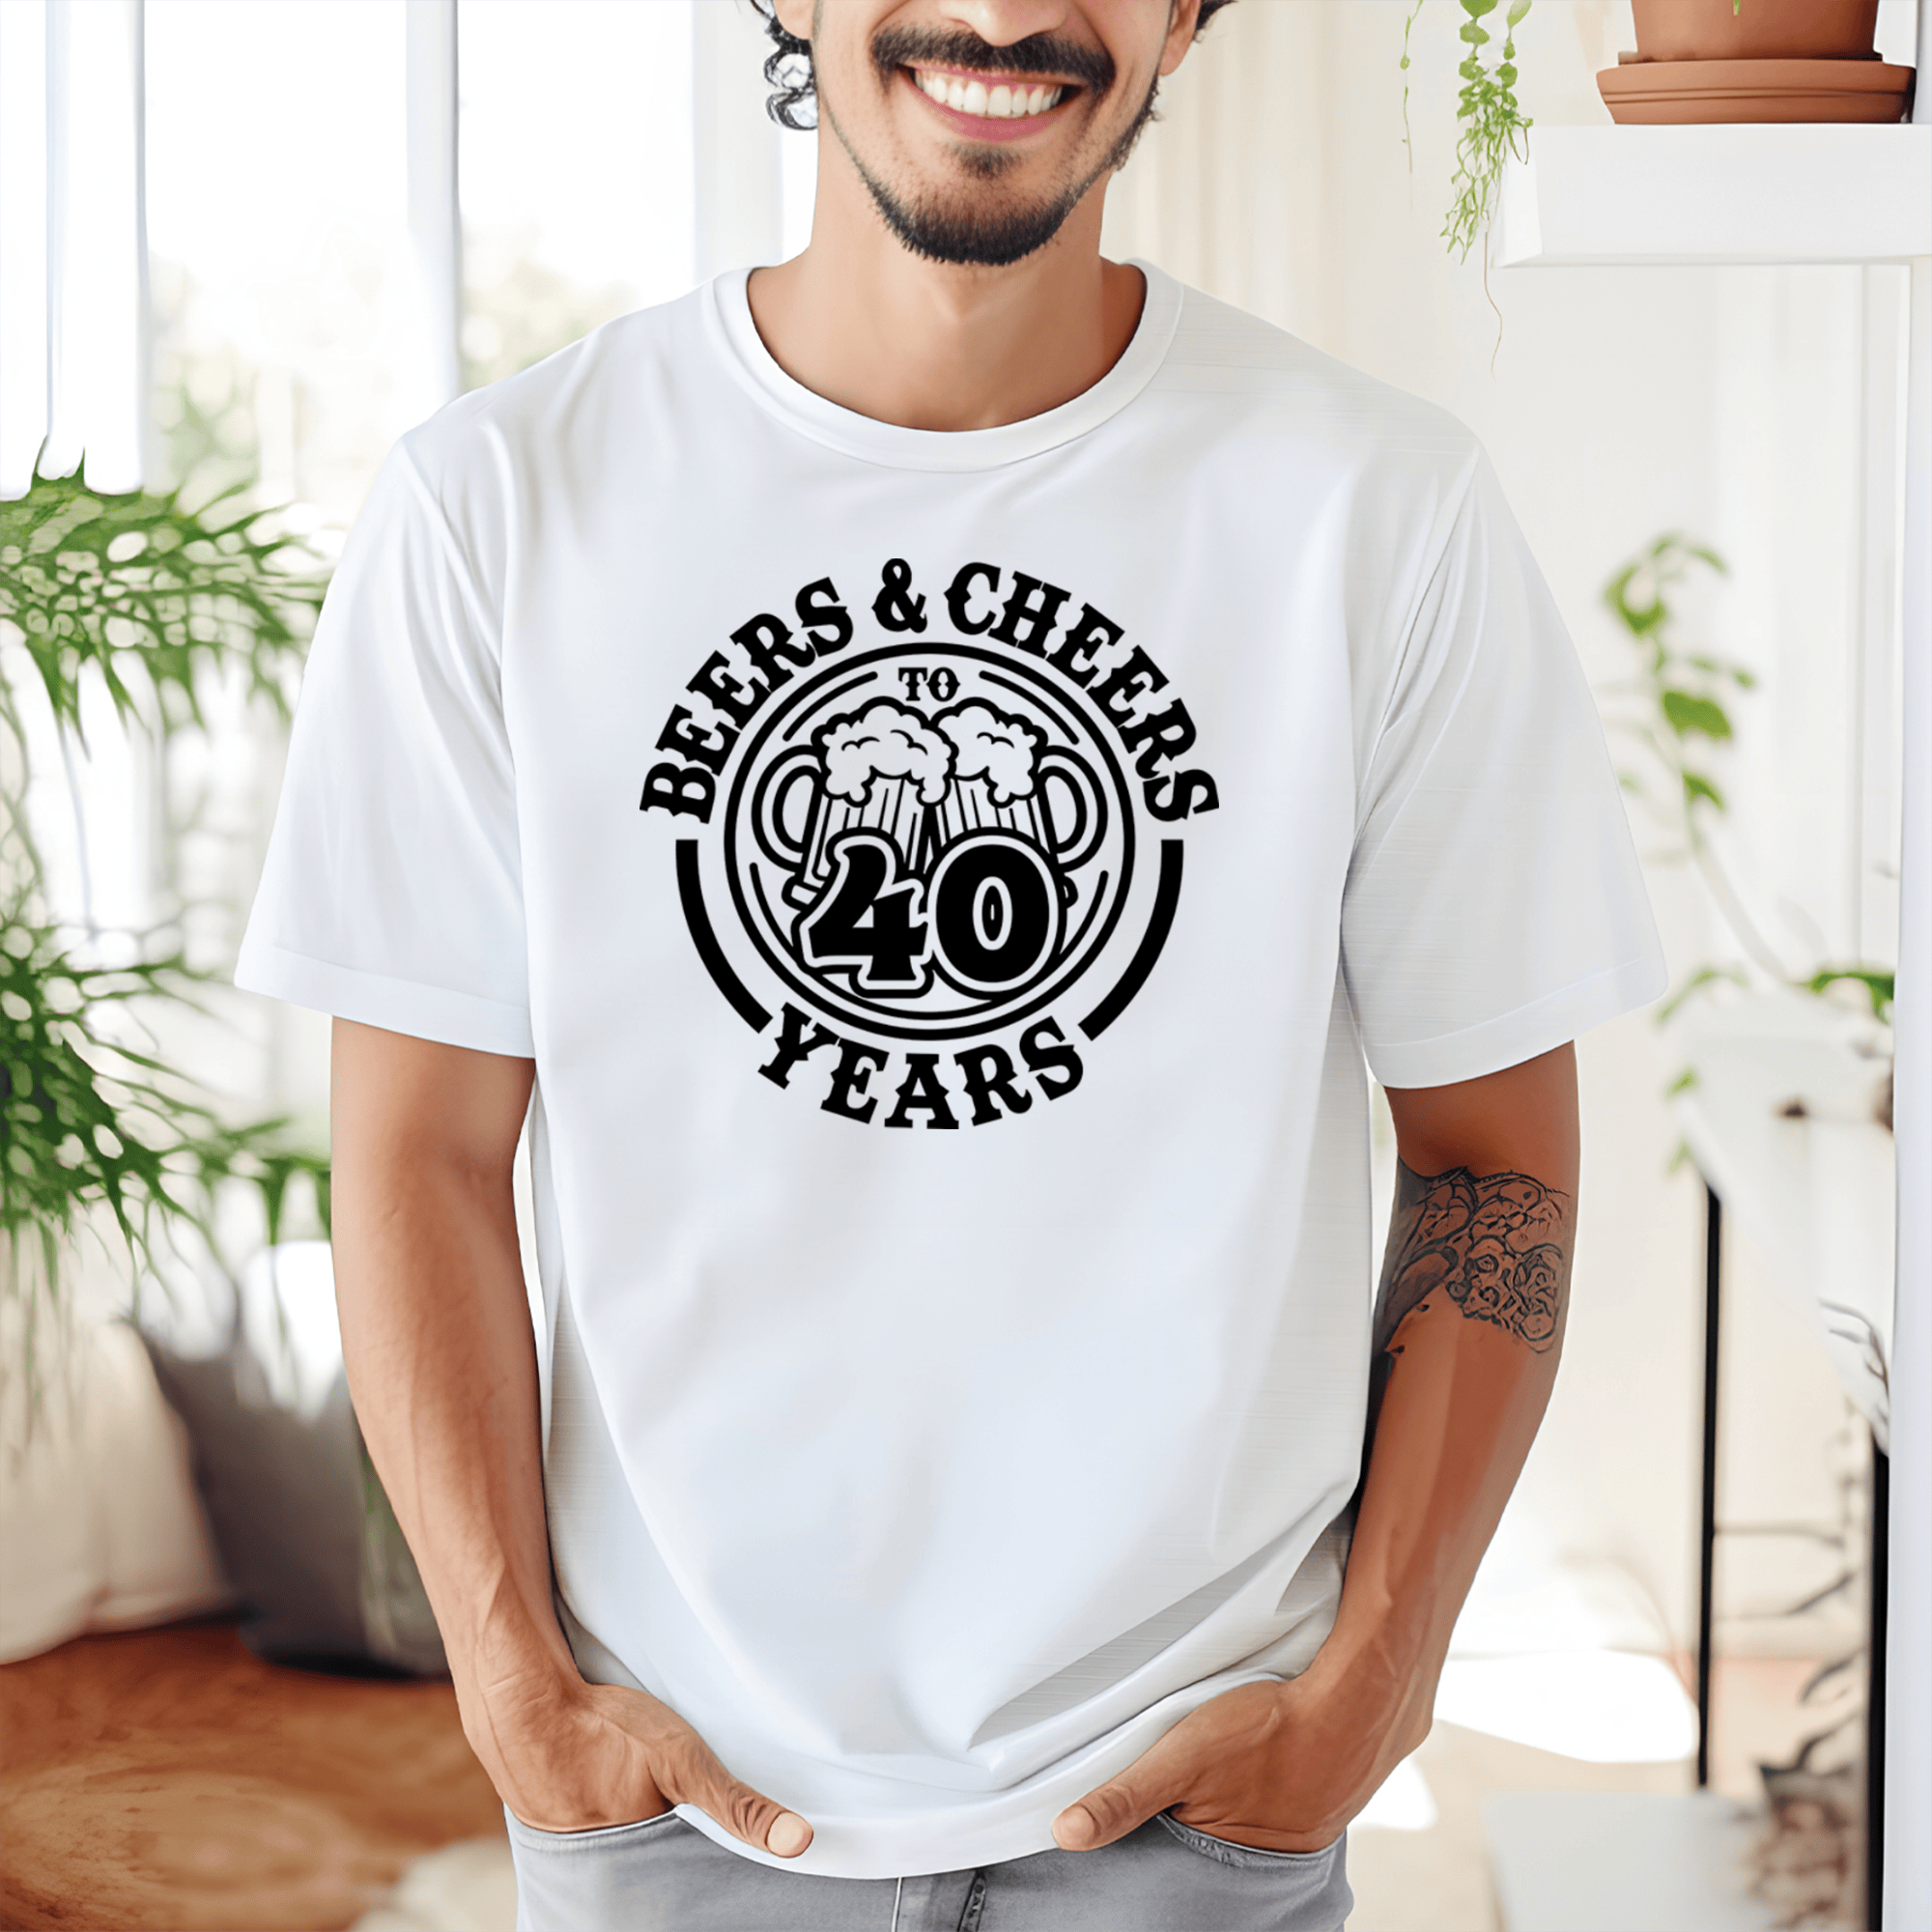 Mens White T Shirt with Beers-And-Cheers-40 design